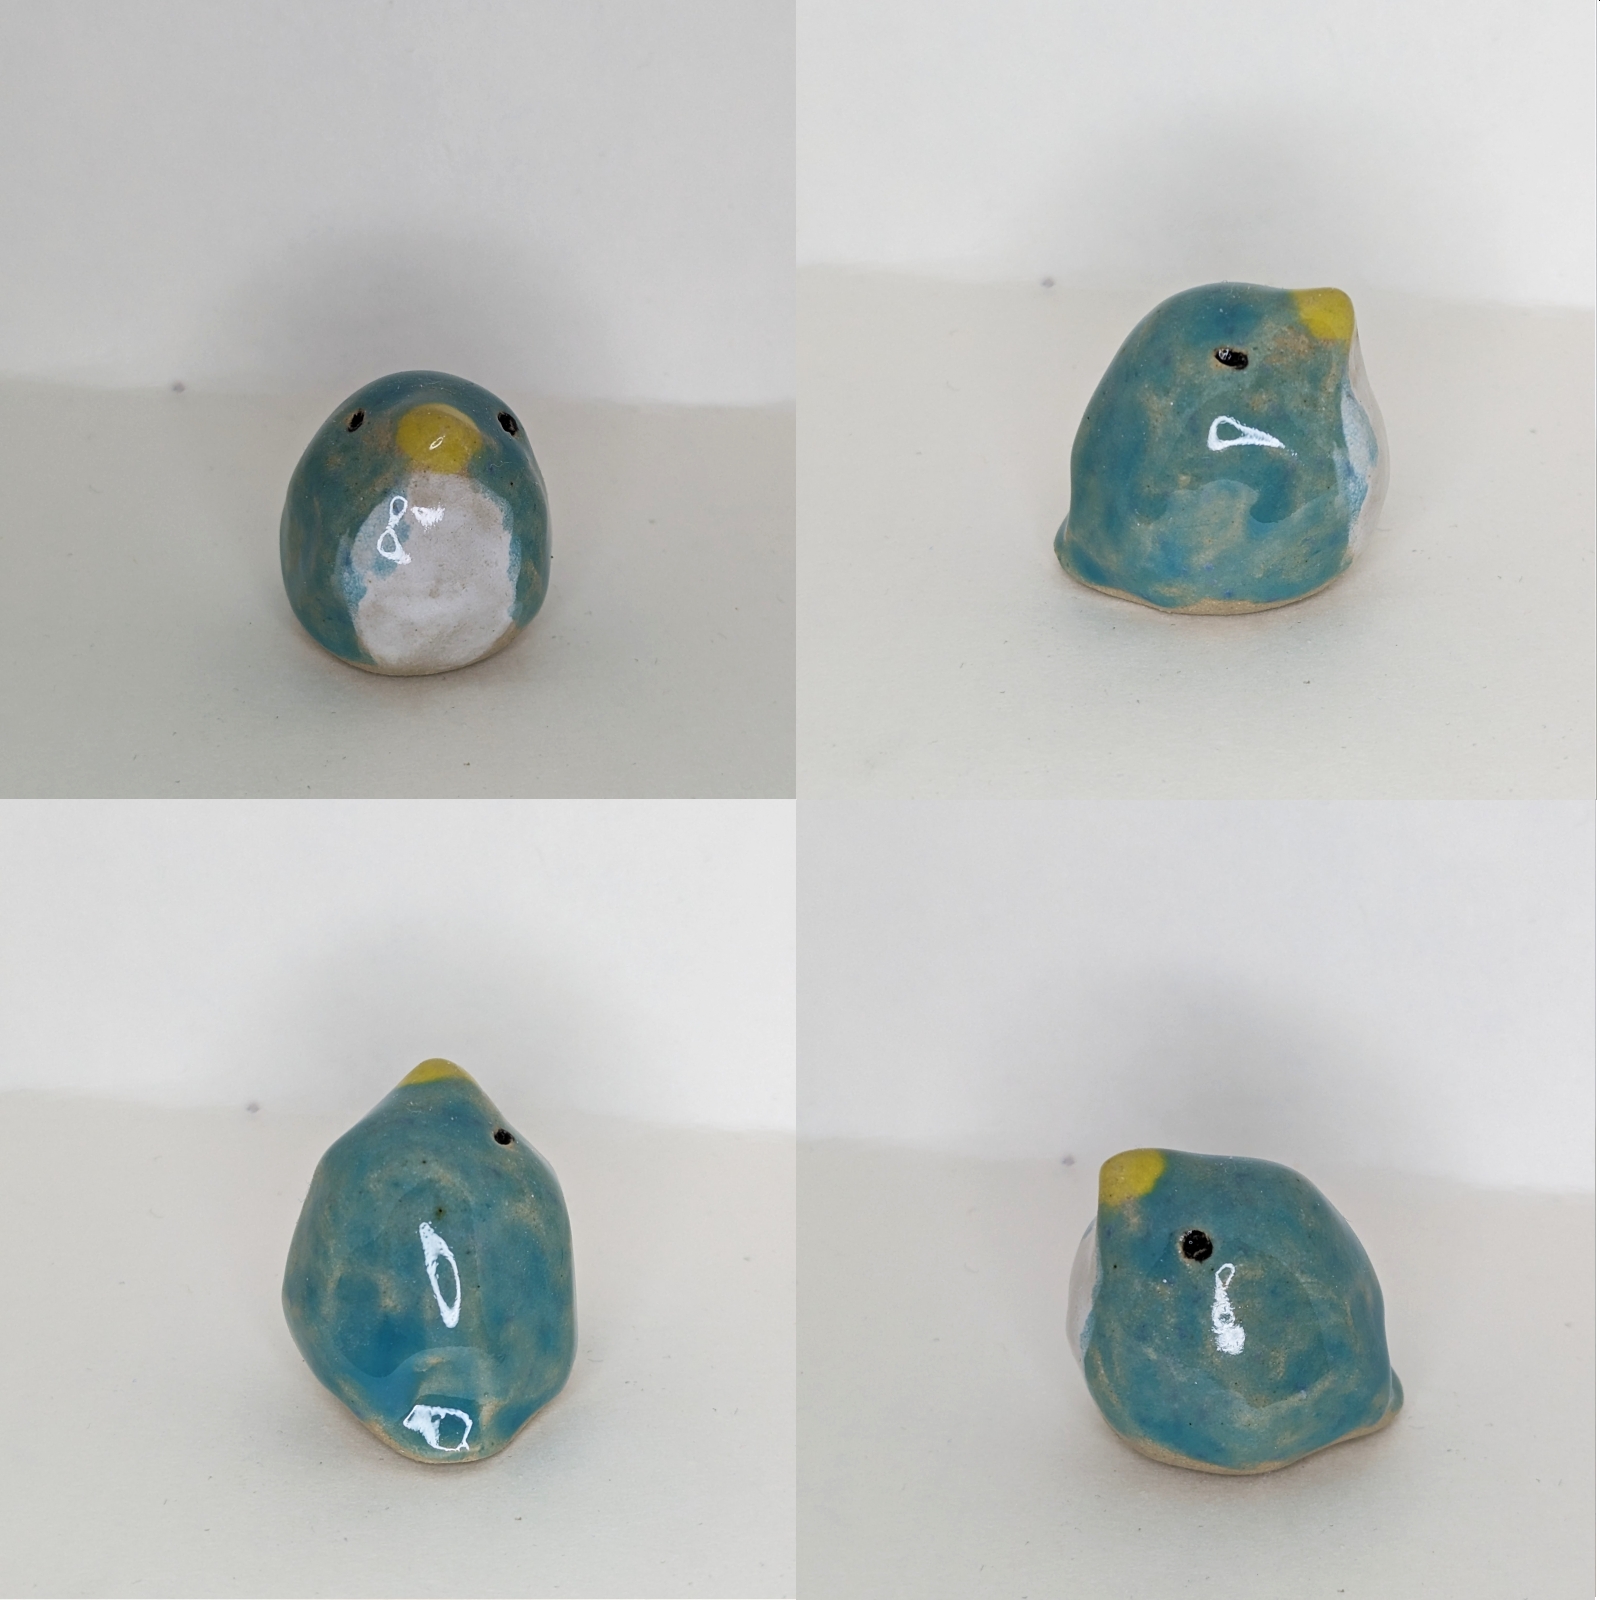 4 views of a small blue and white bird, it is very round. It is ceramic.